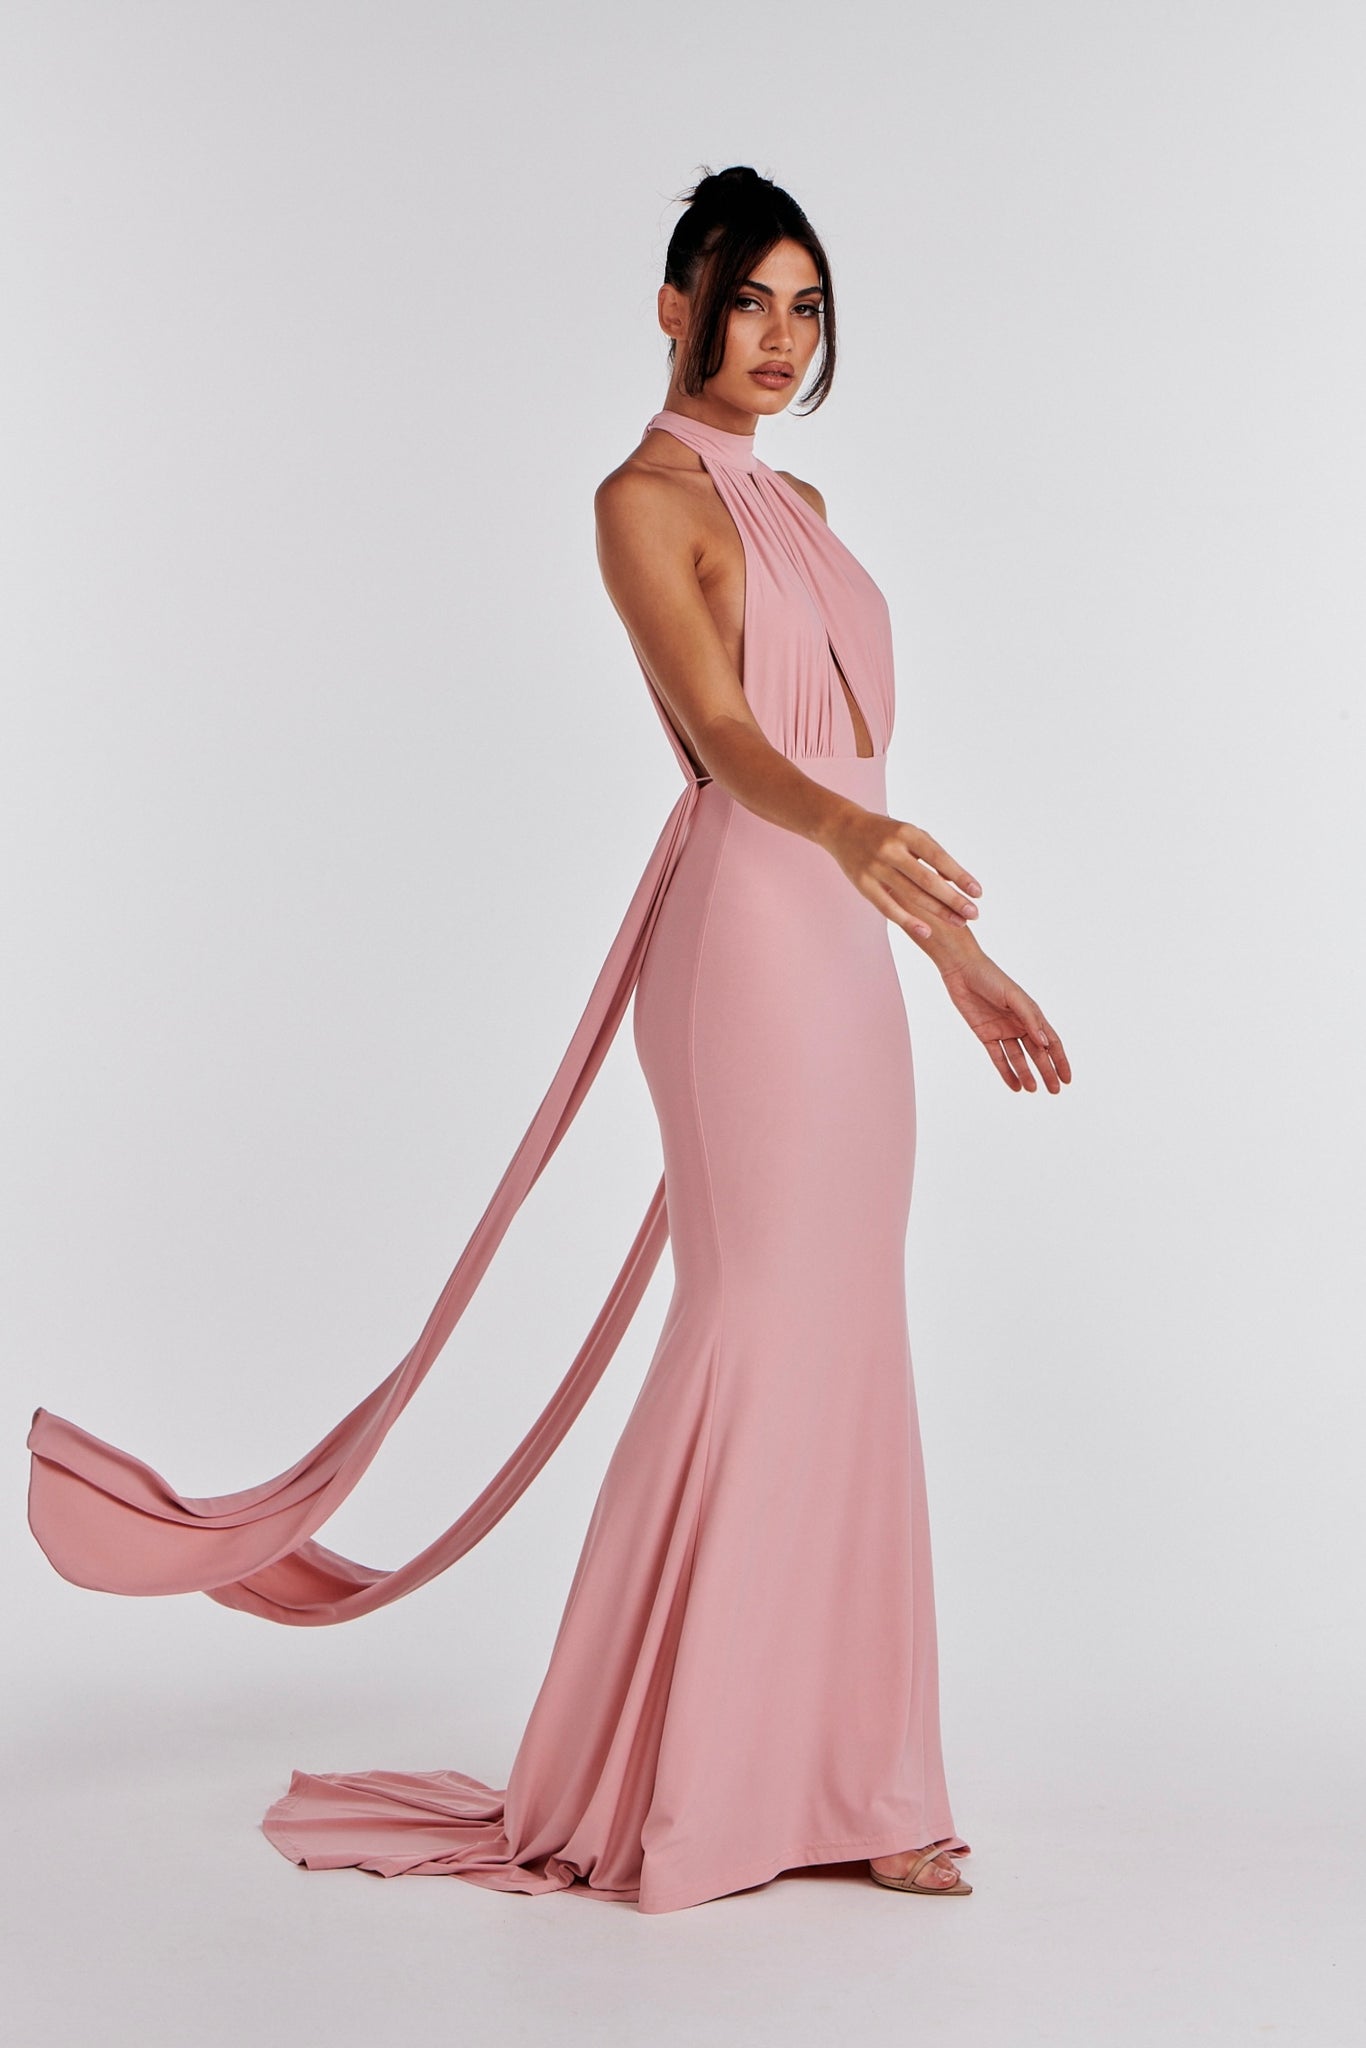 MÉLANI The Label LUCIA Blush Keyhole Neckline Backless Bridesmaid Formal Gown